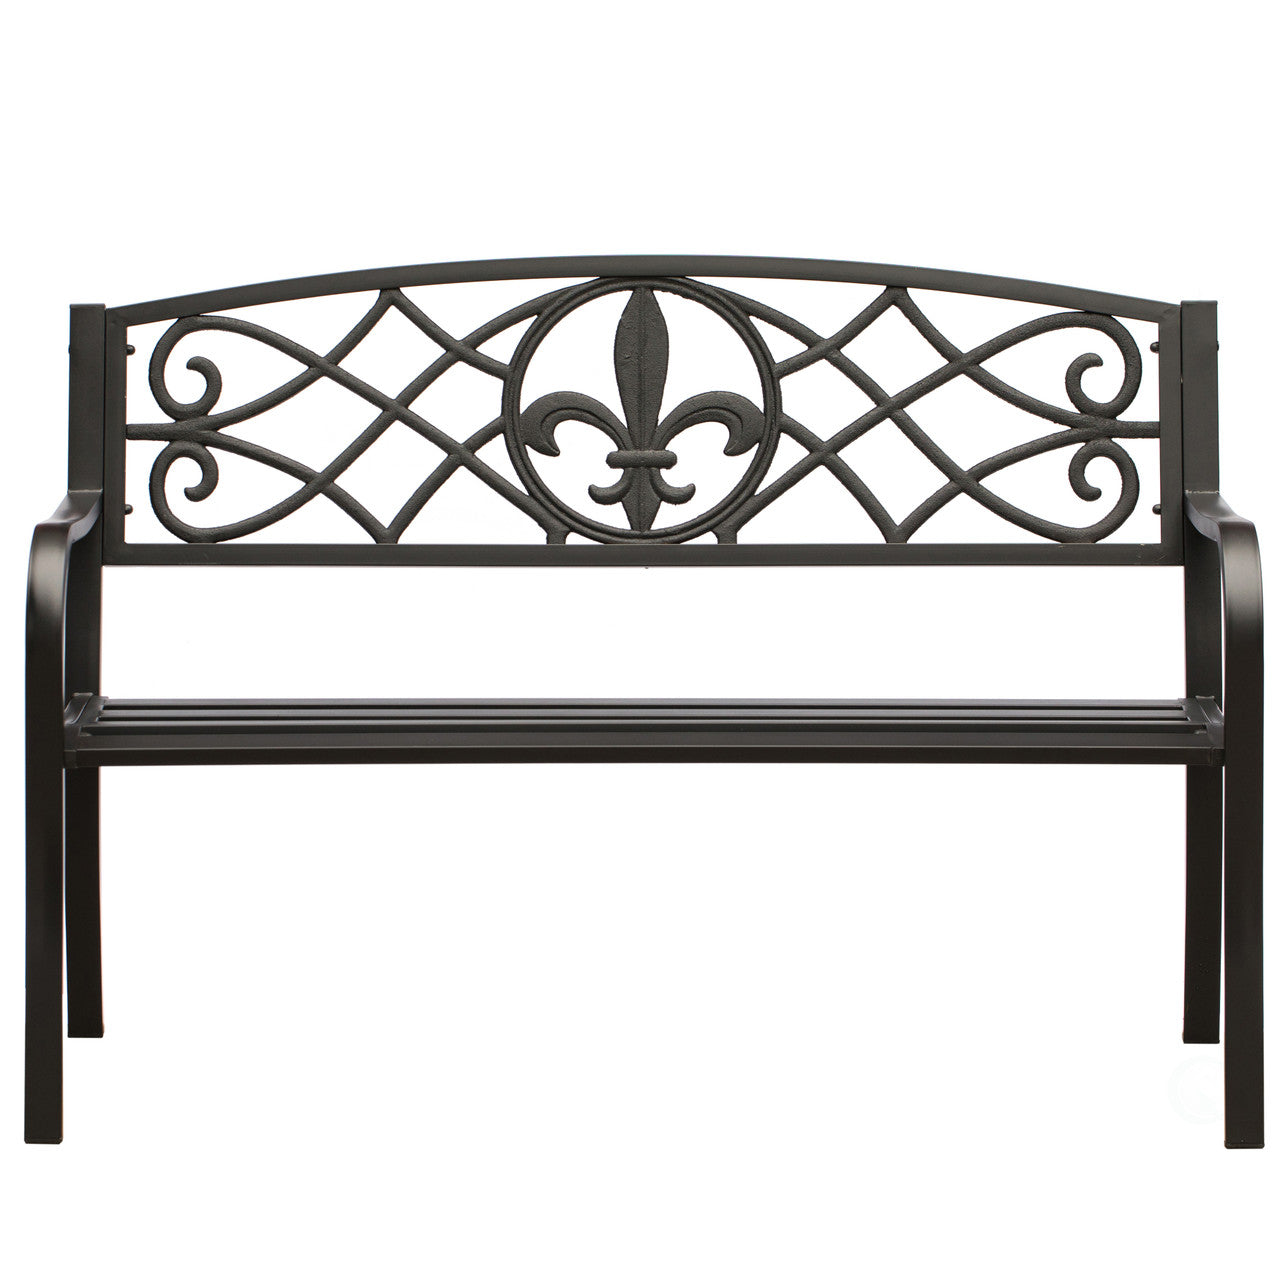 50" Black Outdoor Garden Metal Bench with Cast Iron Back